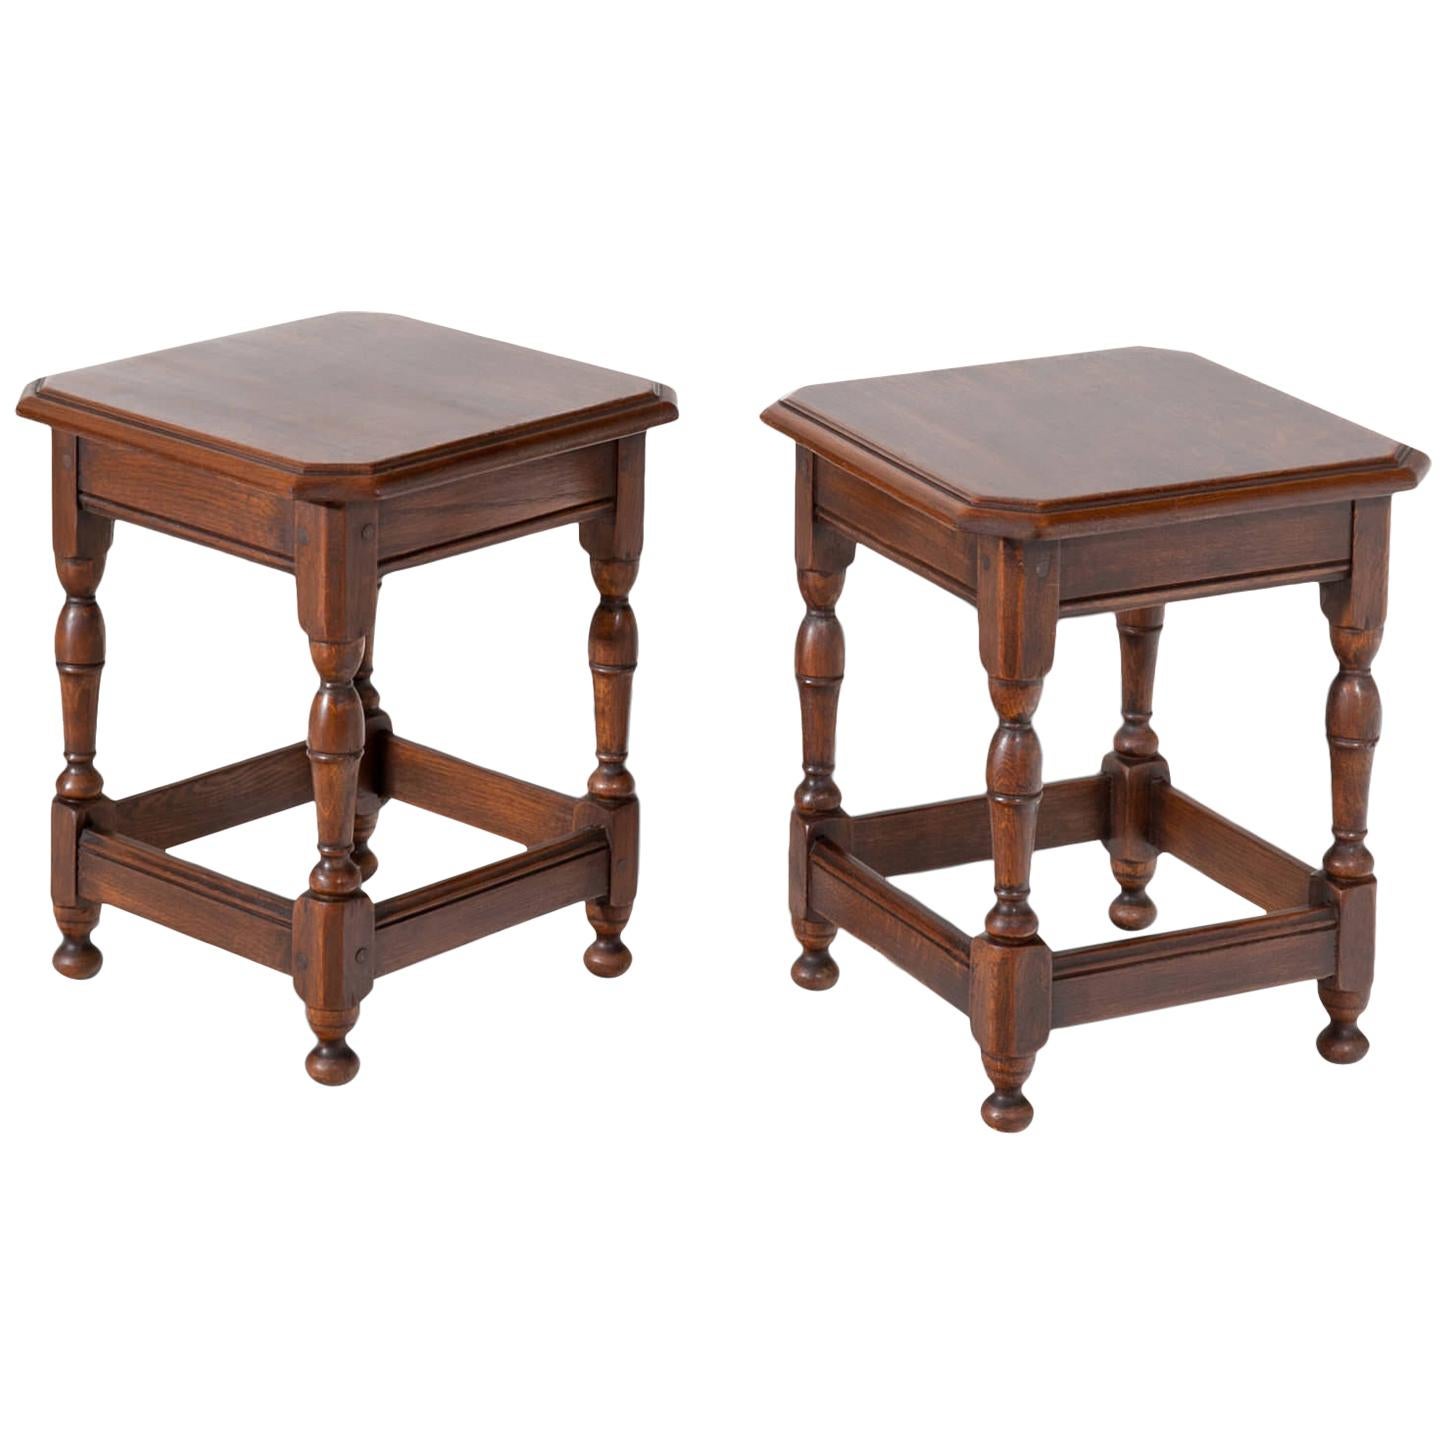 Pair of Side Tables, 19th-20th Century